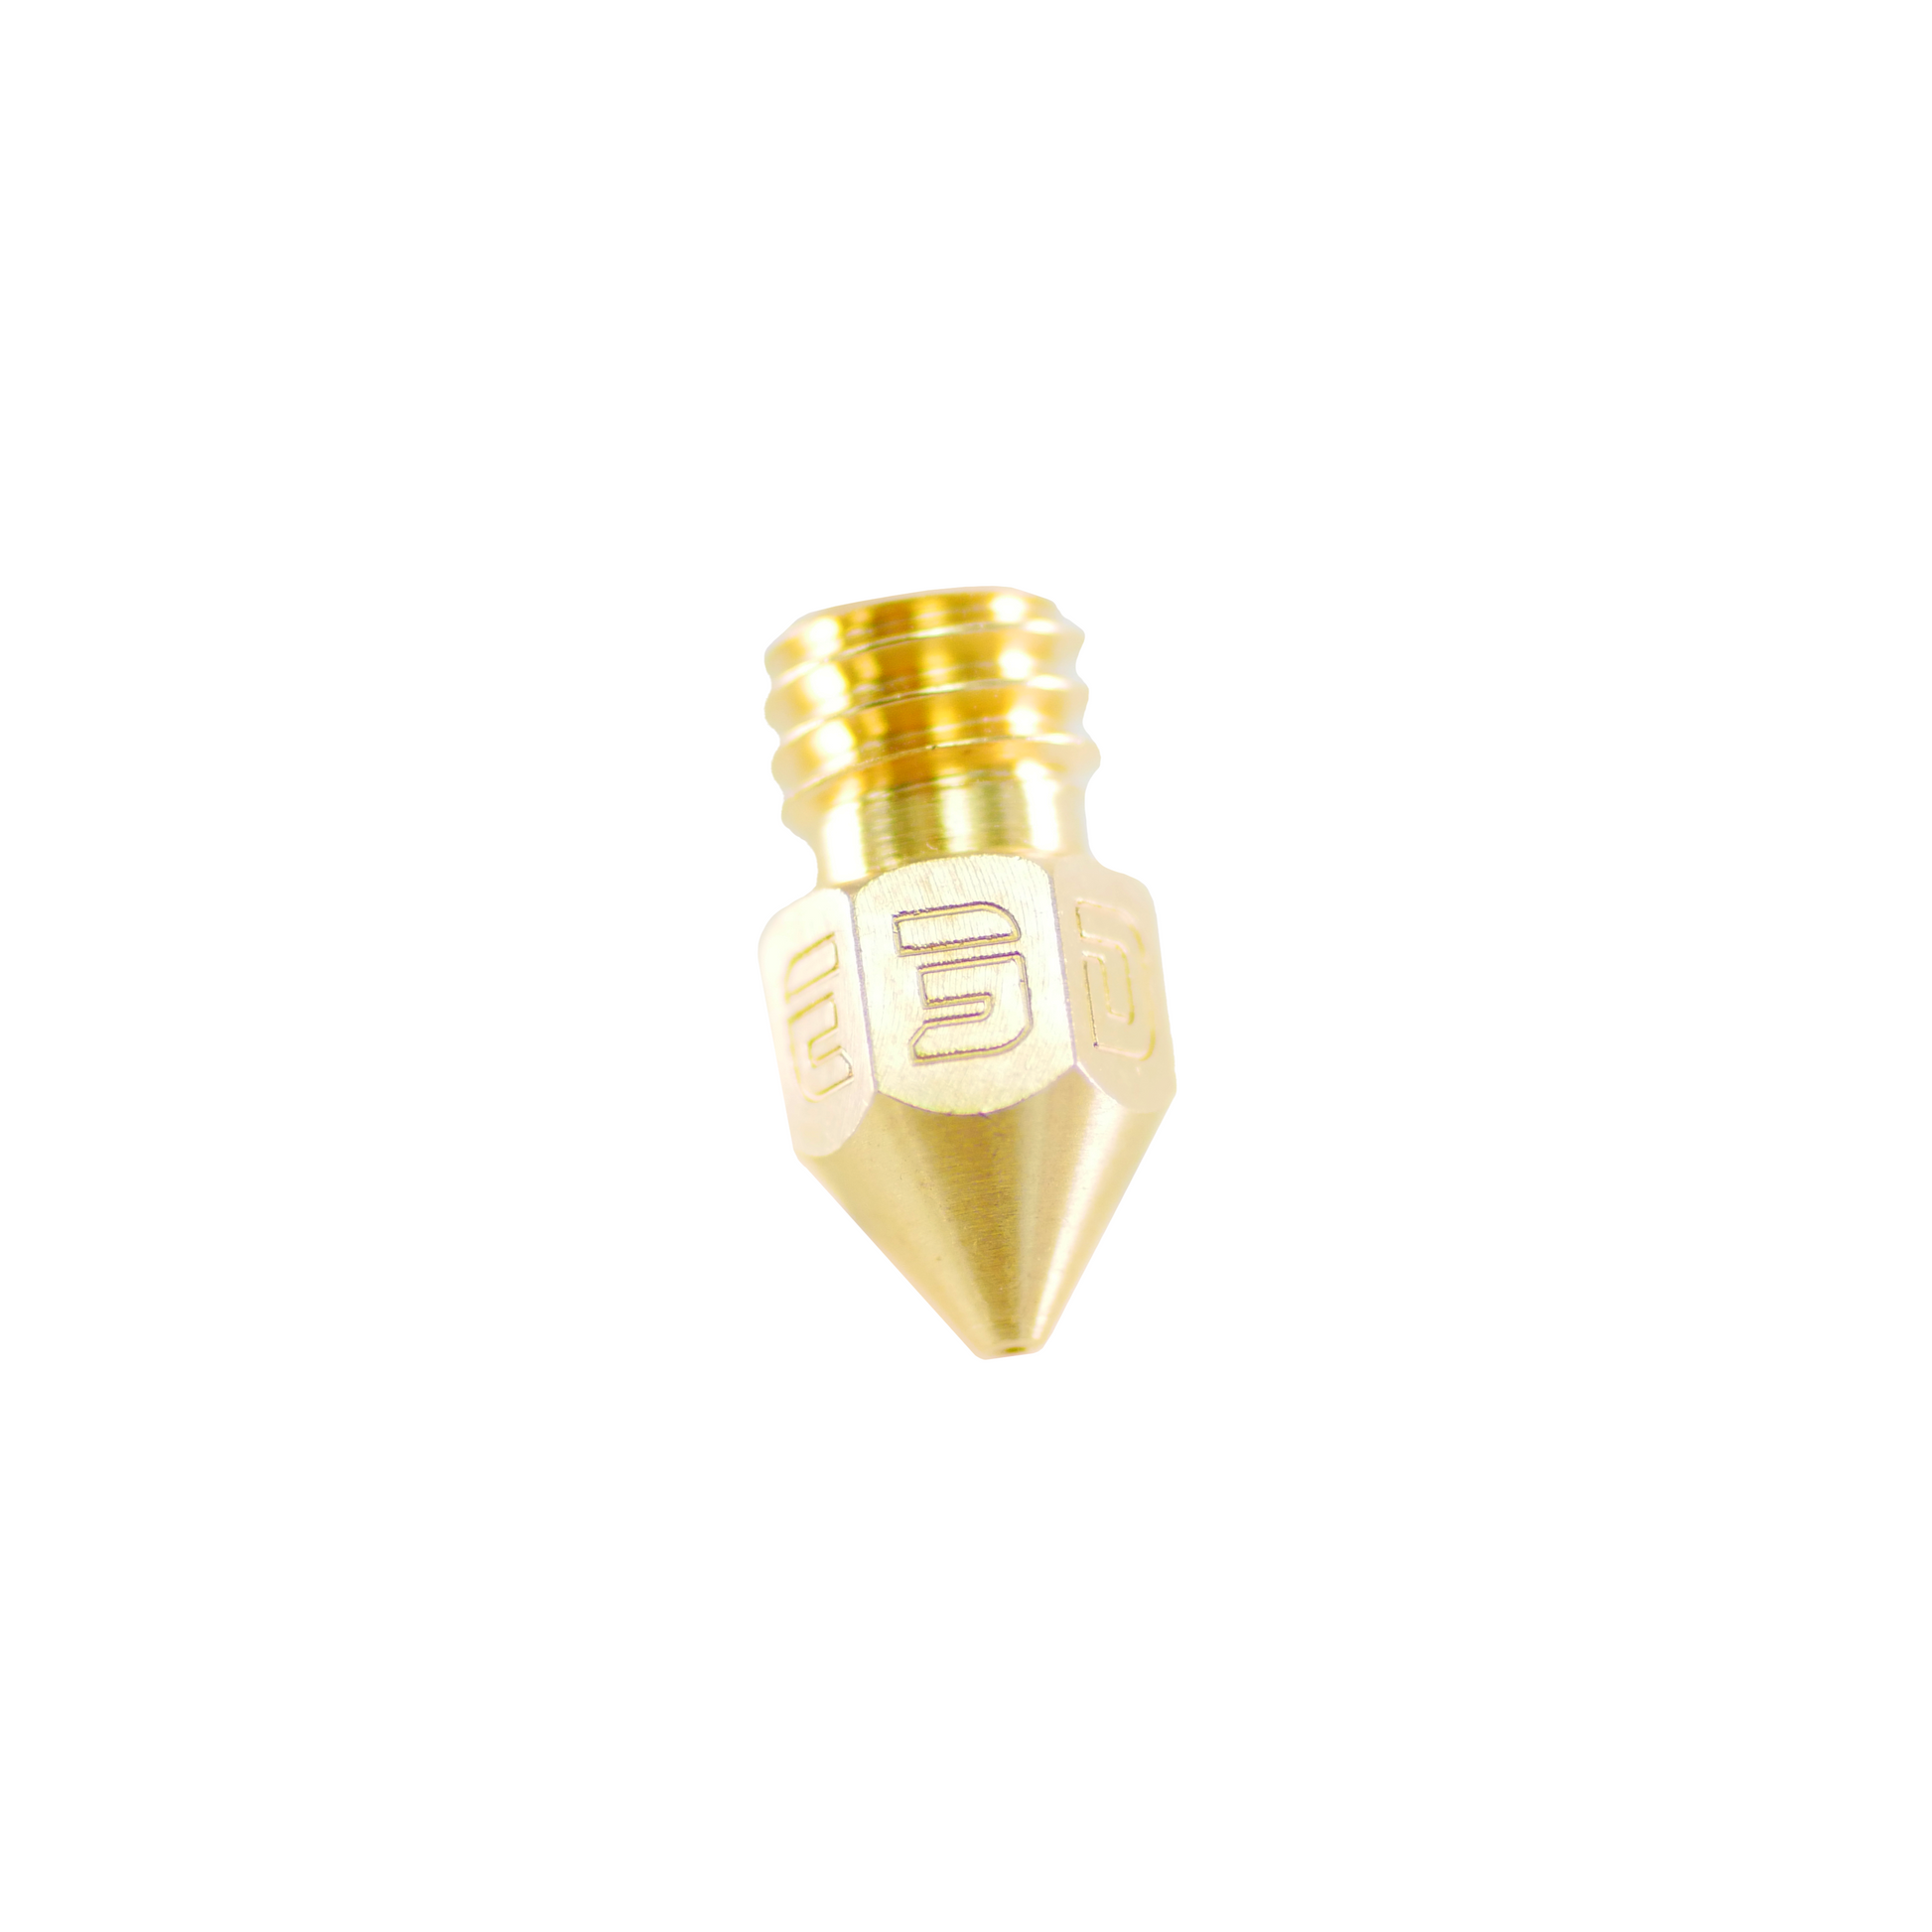 MK8 Brass Tip Nozzles, Small Resistance Nozzle Cleaning Kit